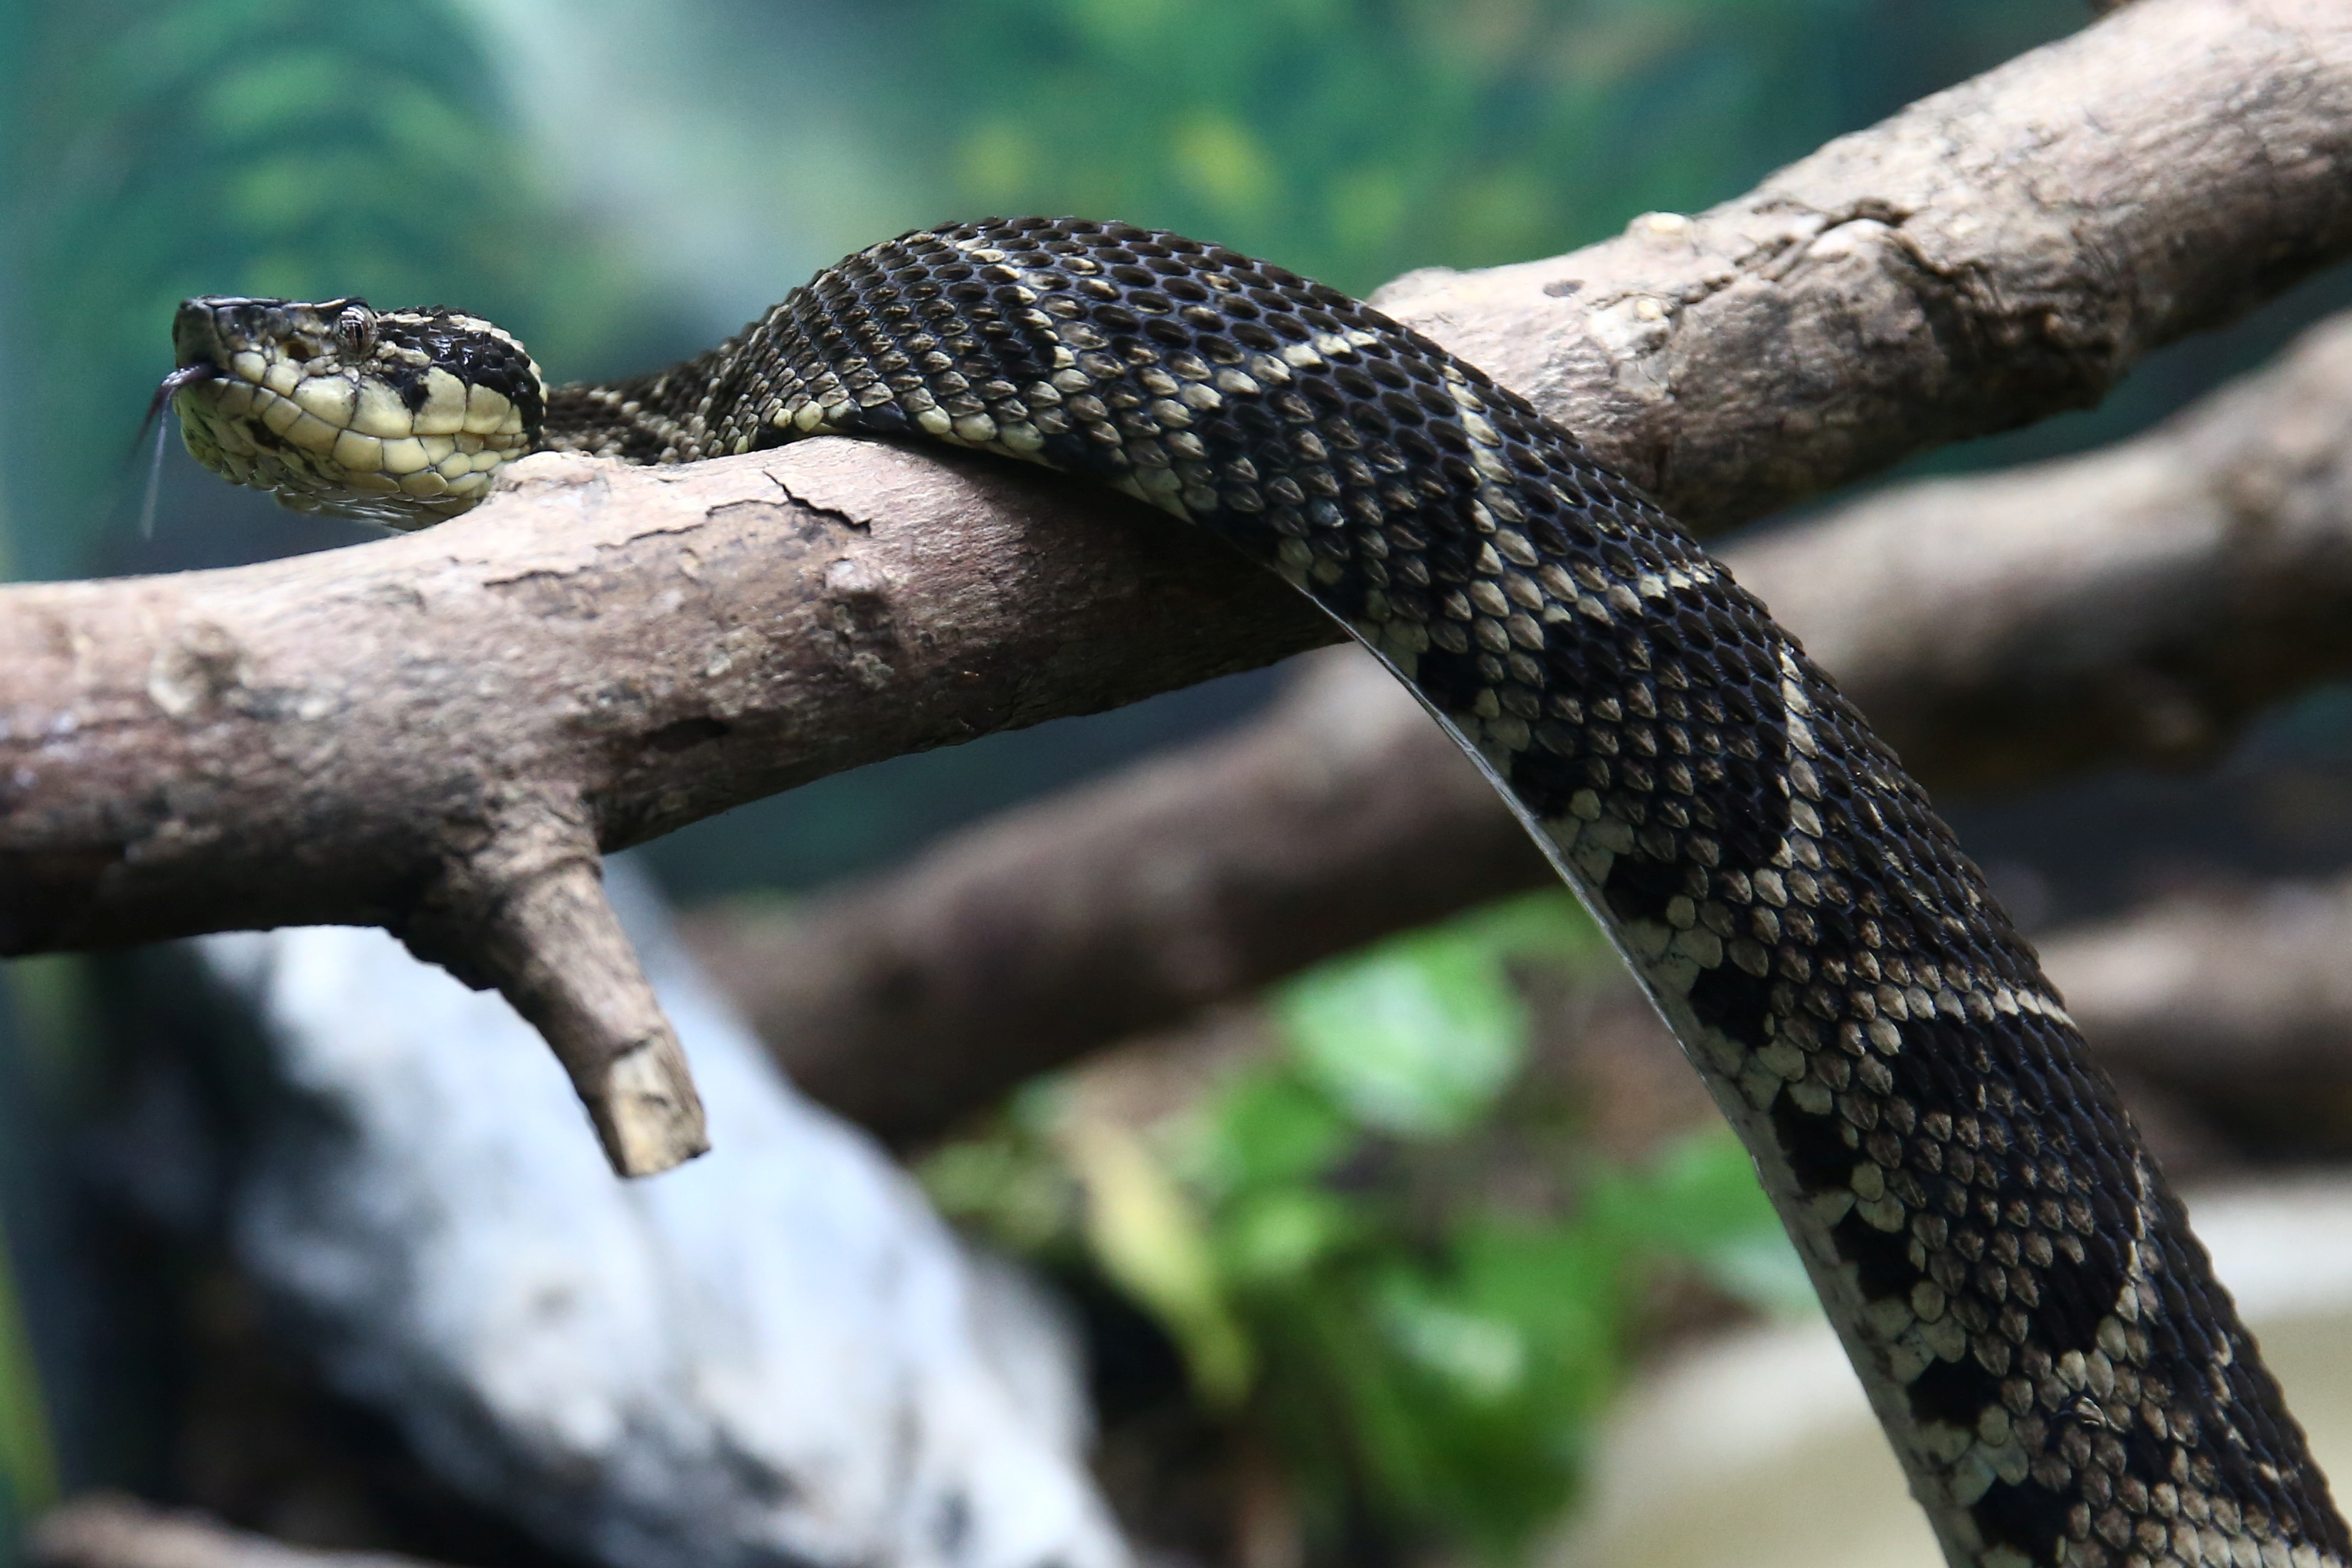 Venomous Snakes And Curing